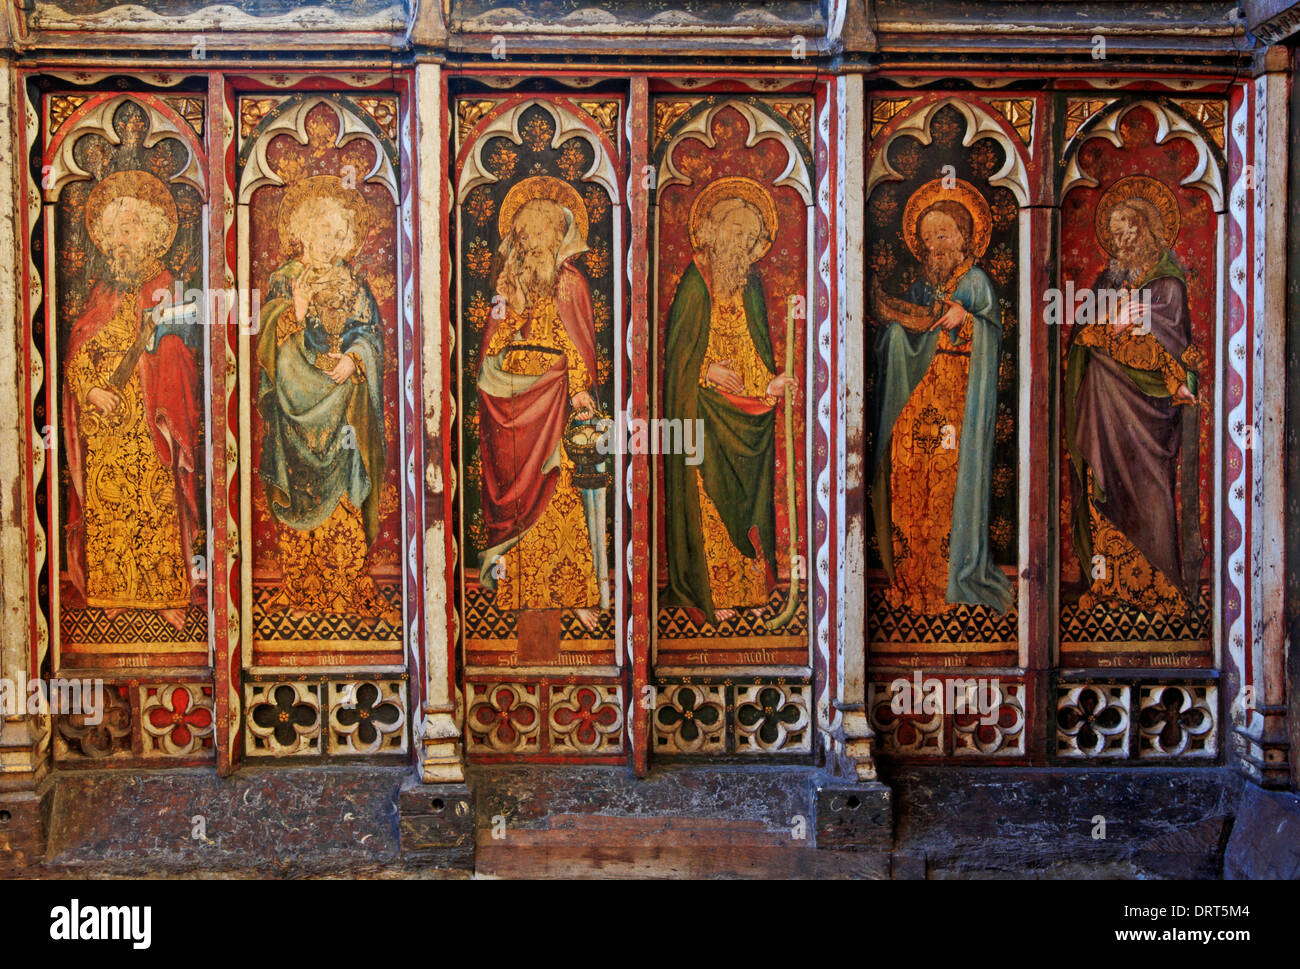 A view of part of the rood screen in the church of St Helen at Ranworth, Norfolk, England, United Kingdom. Stock Photo